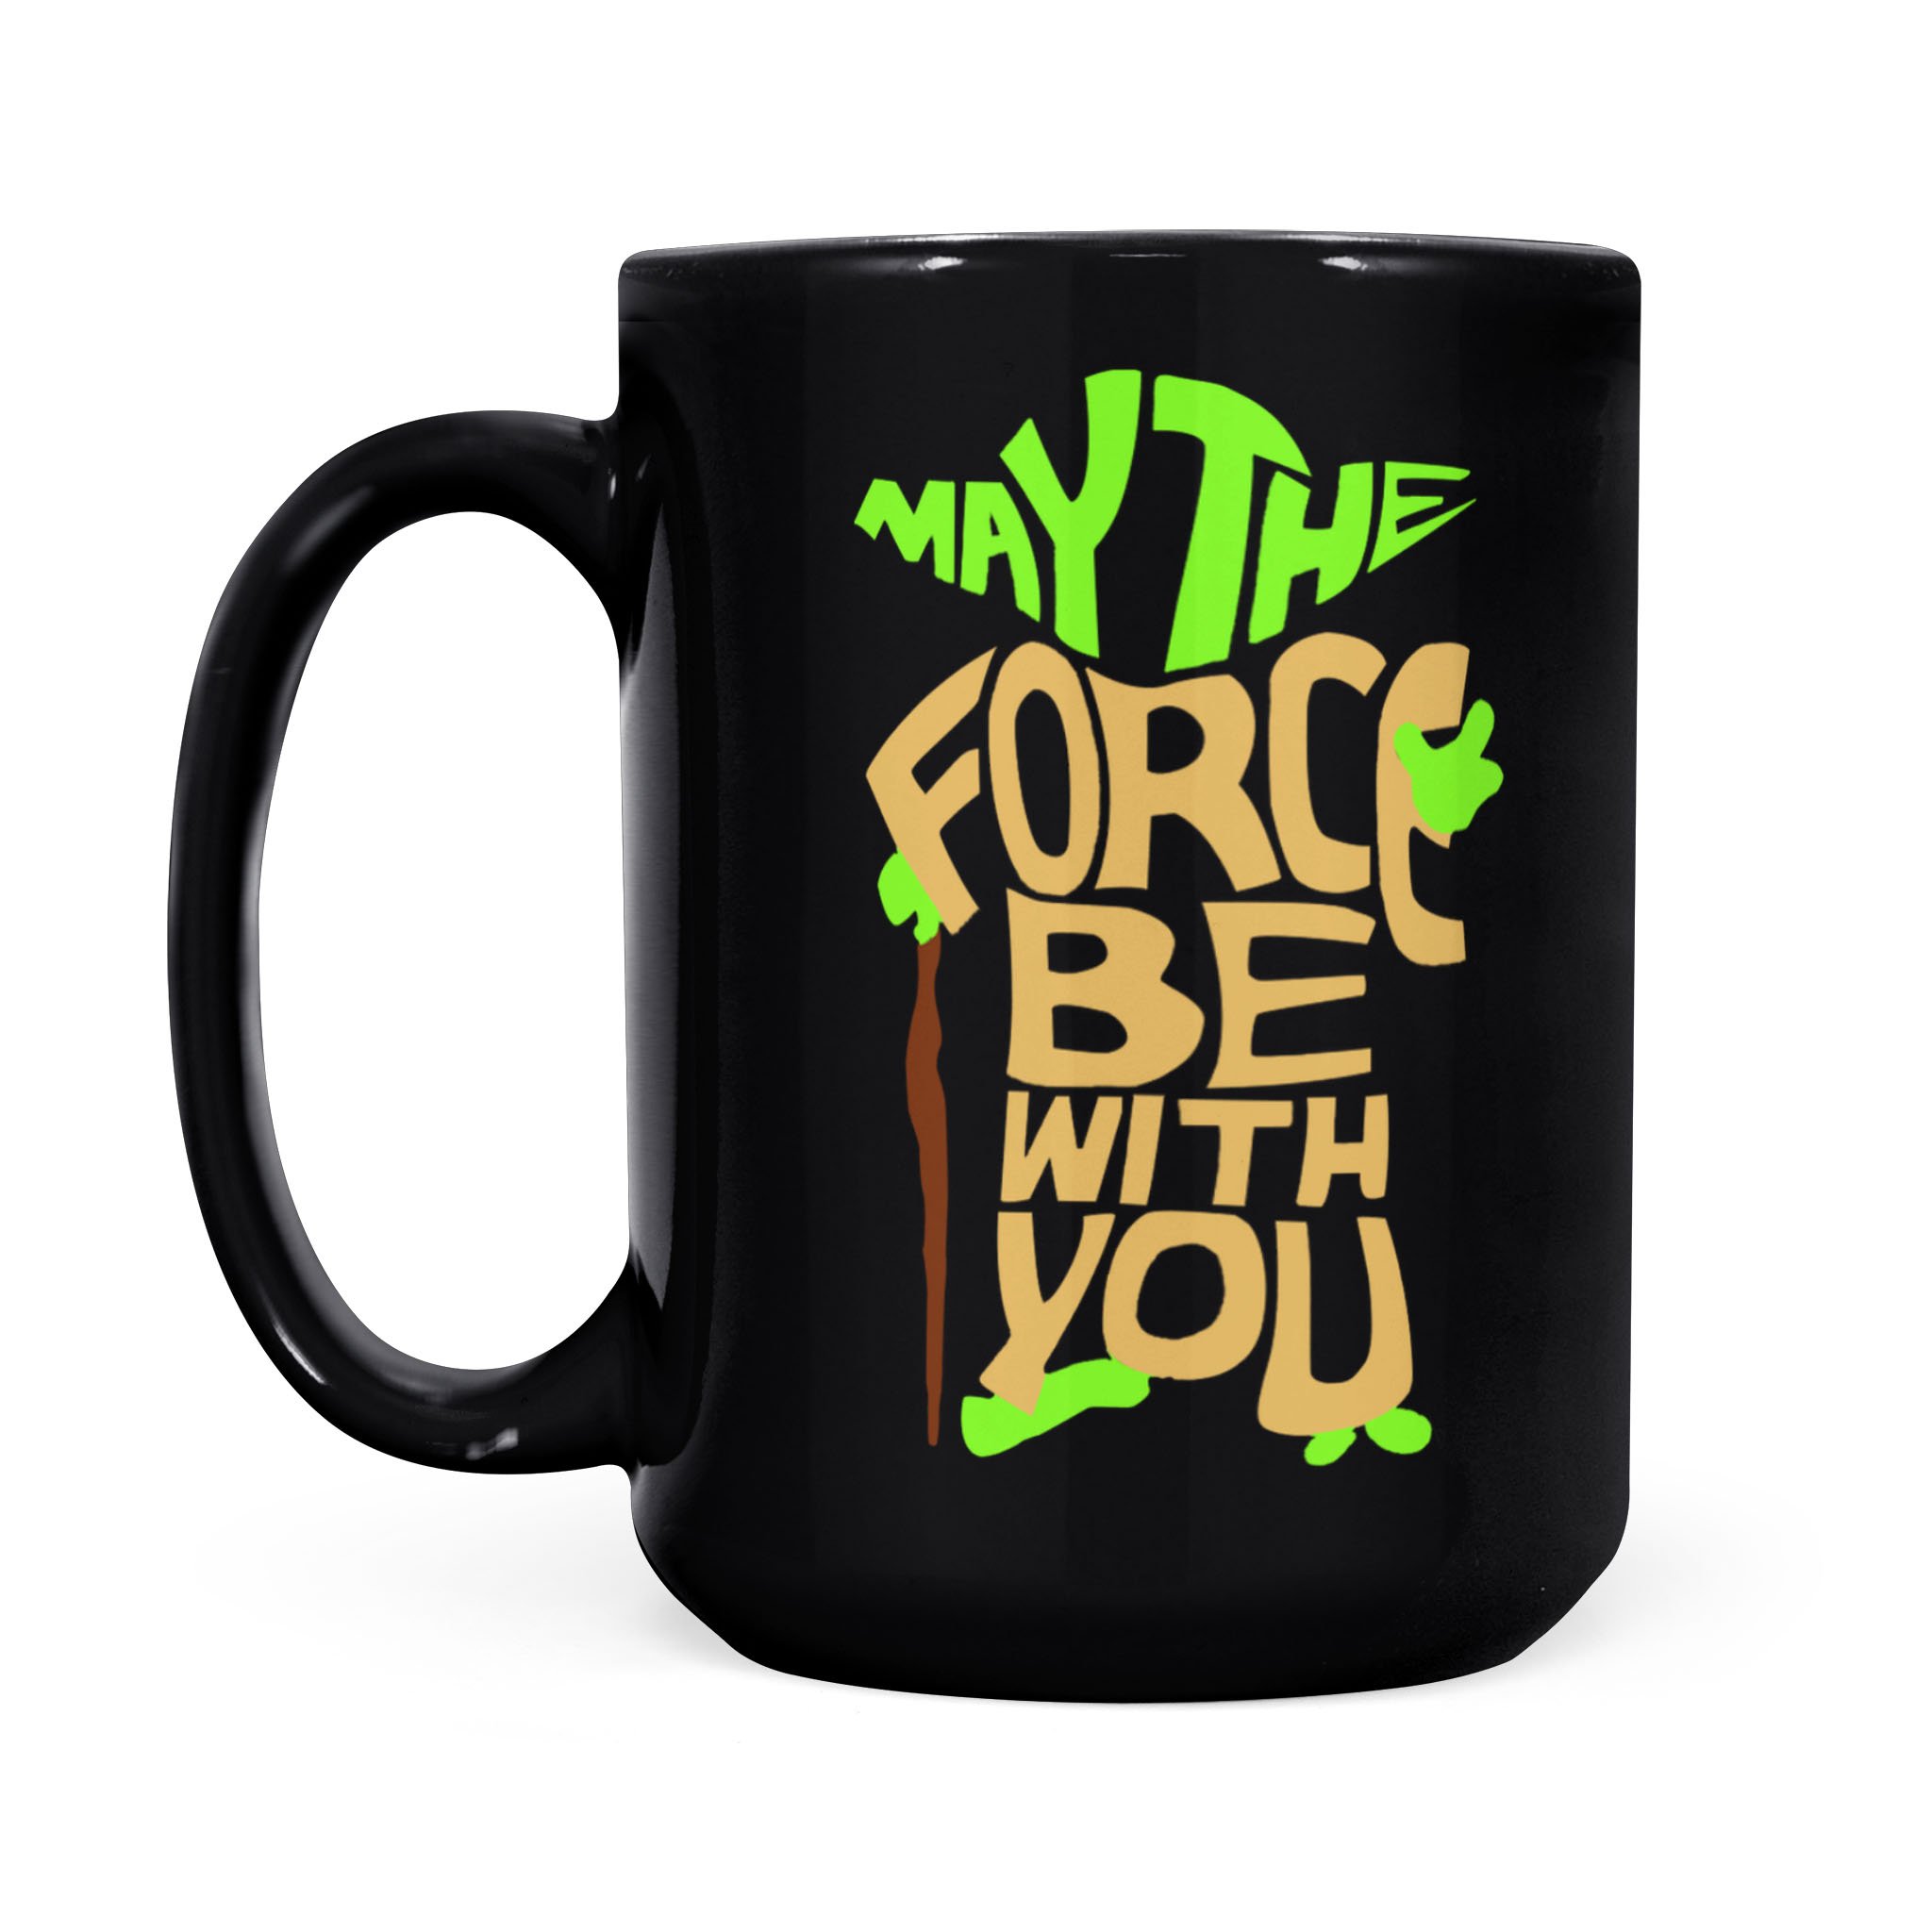 Mug Black May The Force Be With You